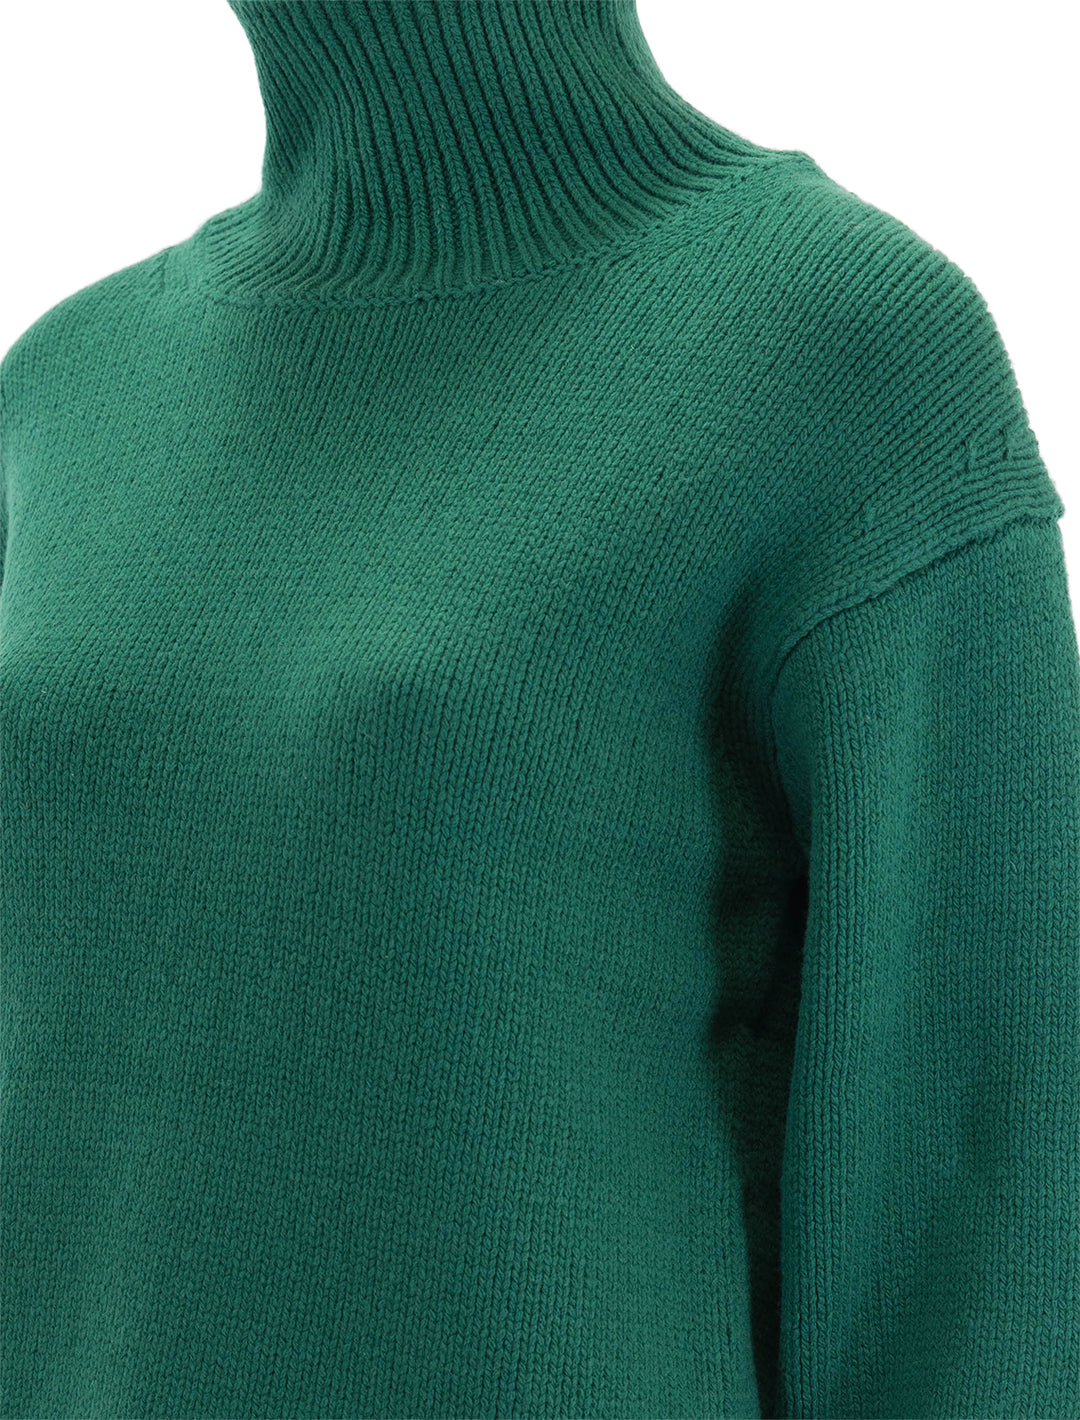 Close-up view of Alex Mill's betty turtleneck in evergreen.